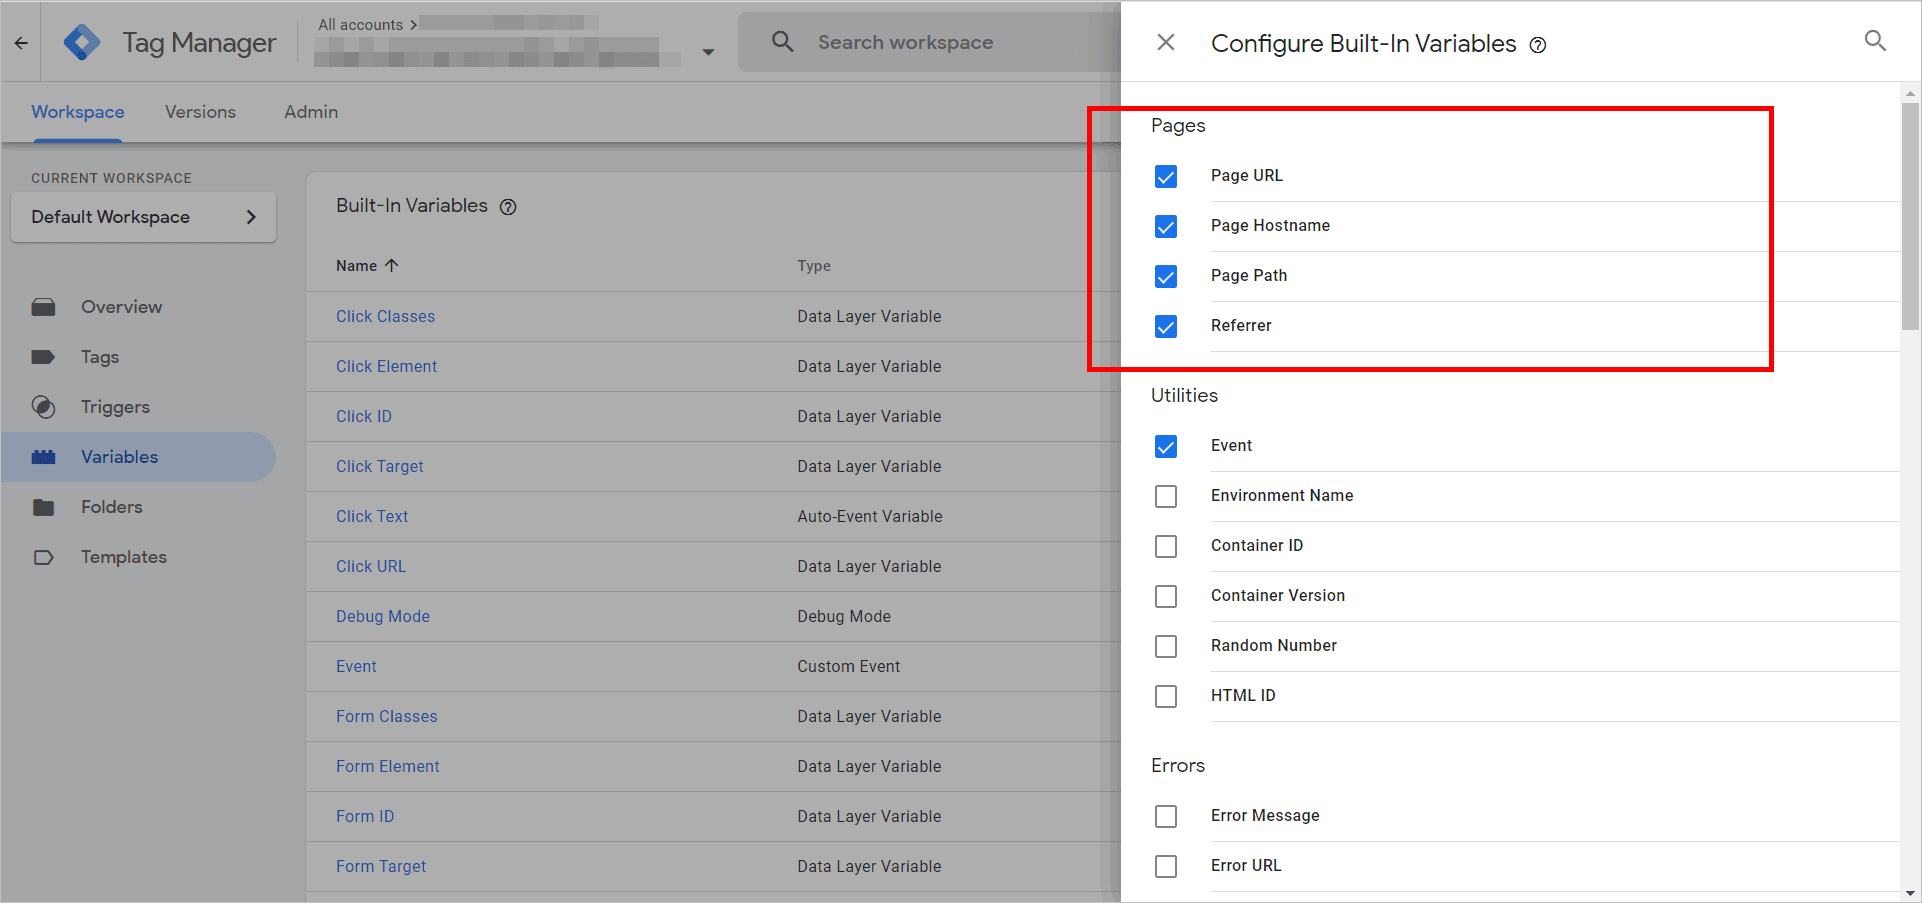  track pdf downloads google tag manager - configure built-in variables panel with the pages variables clicked and highlighted